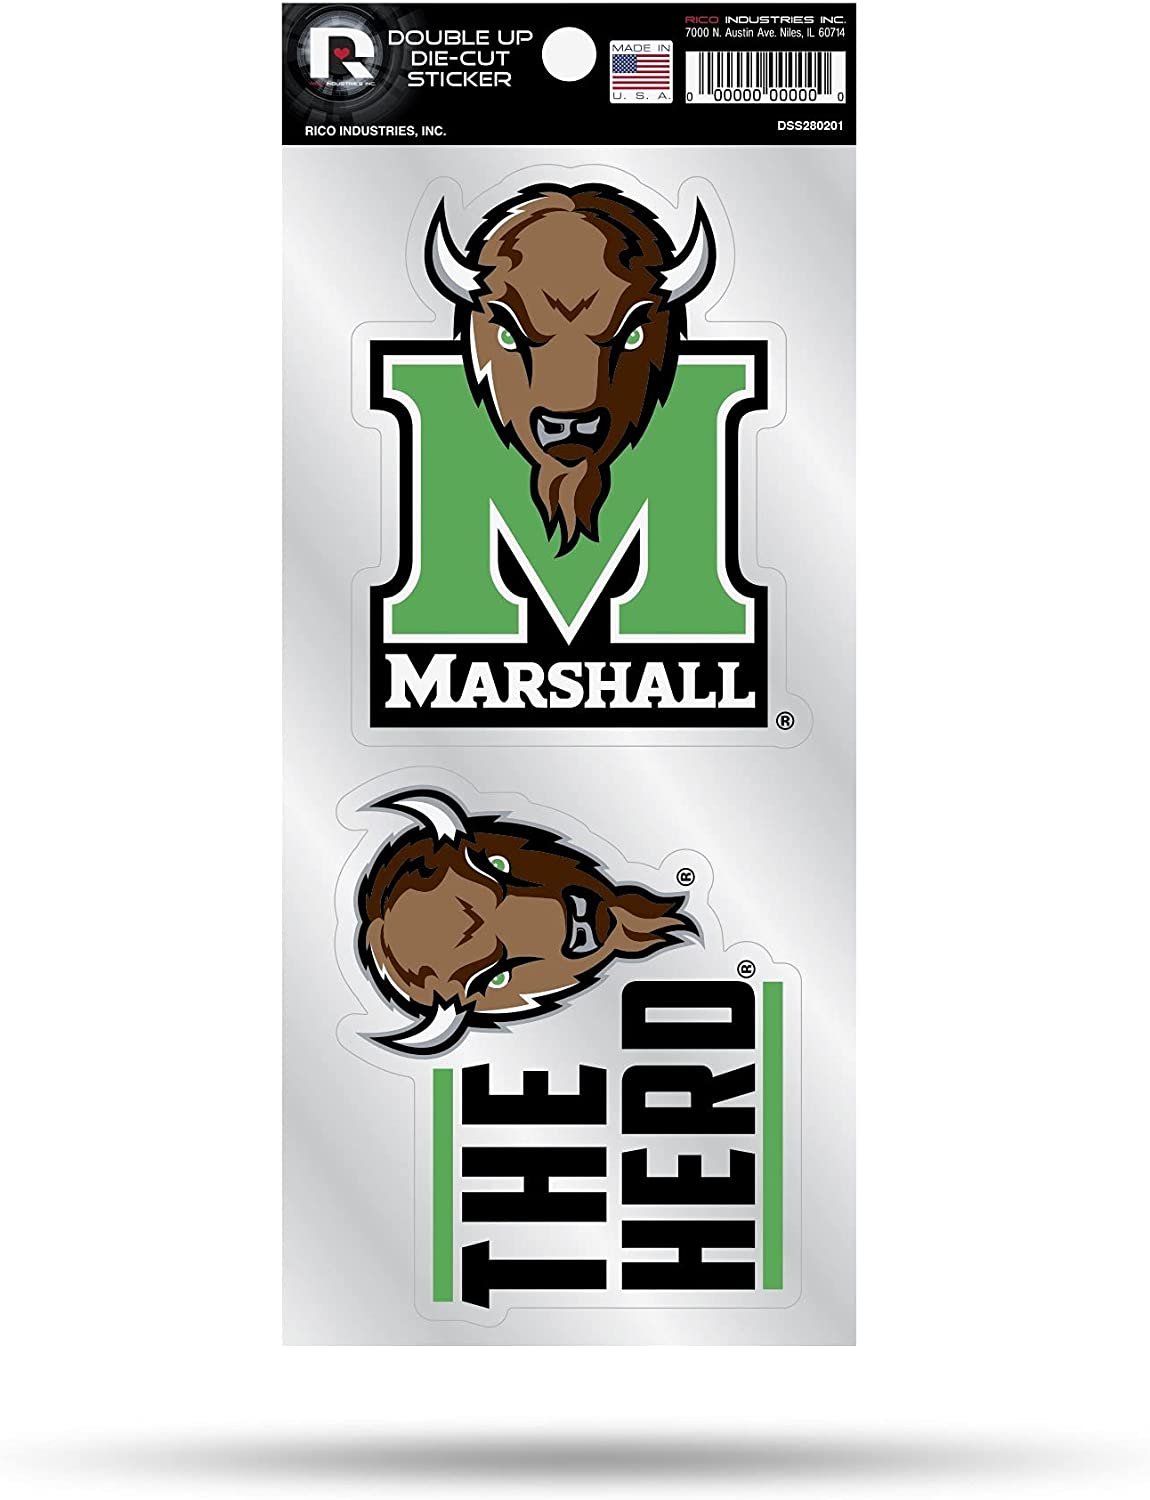 Marshall University Thundering Herd 2-Piece Double Up Die Cut Sticker Decal Sheet, 4x8 Inch